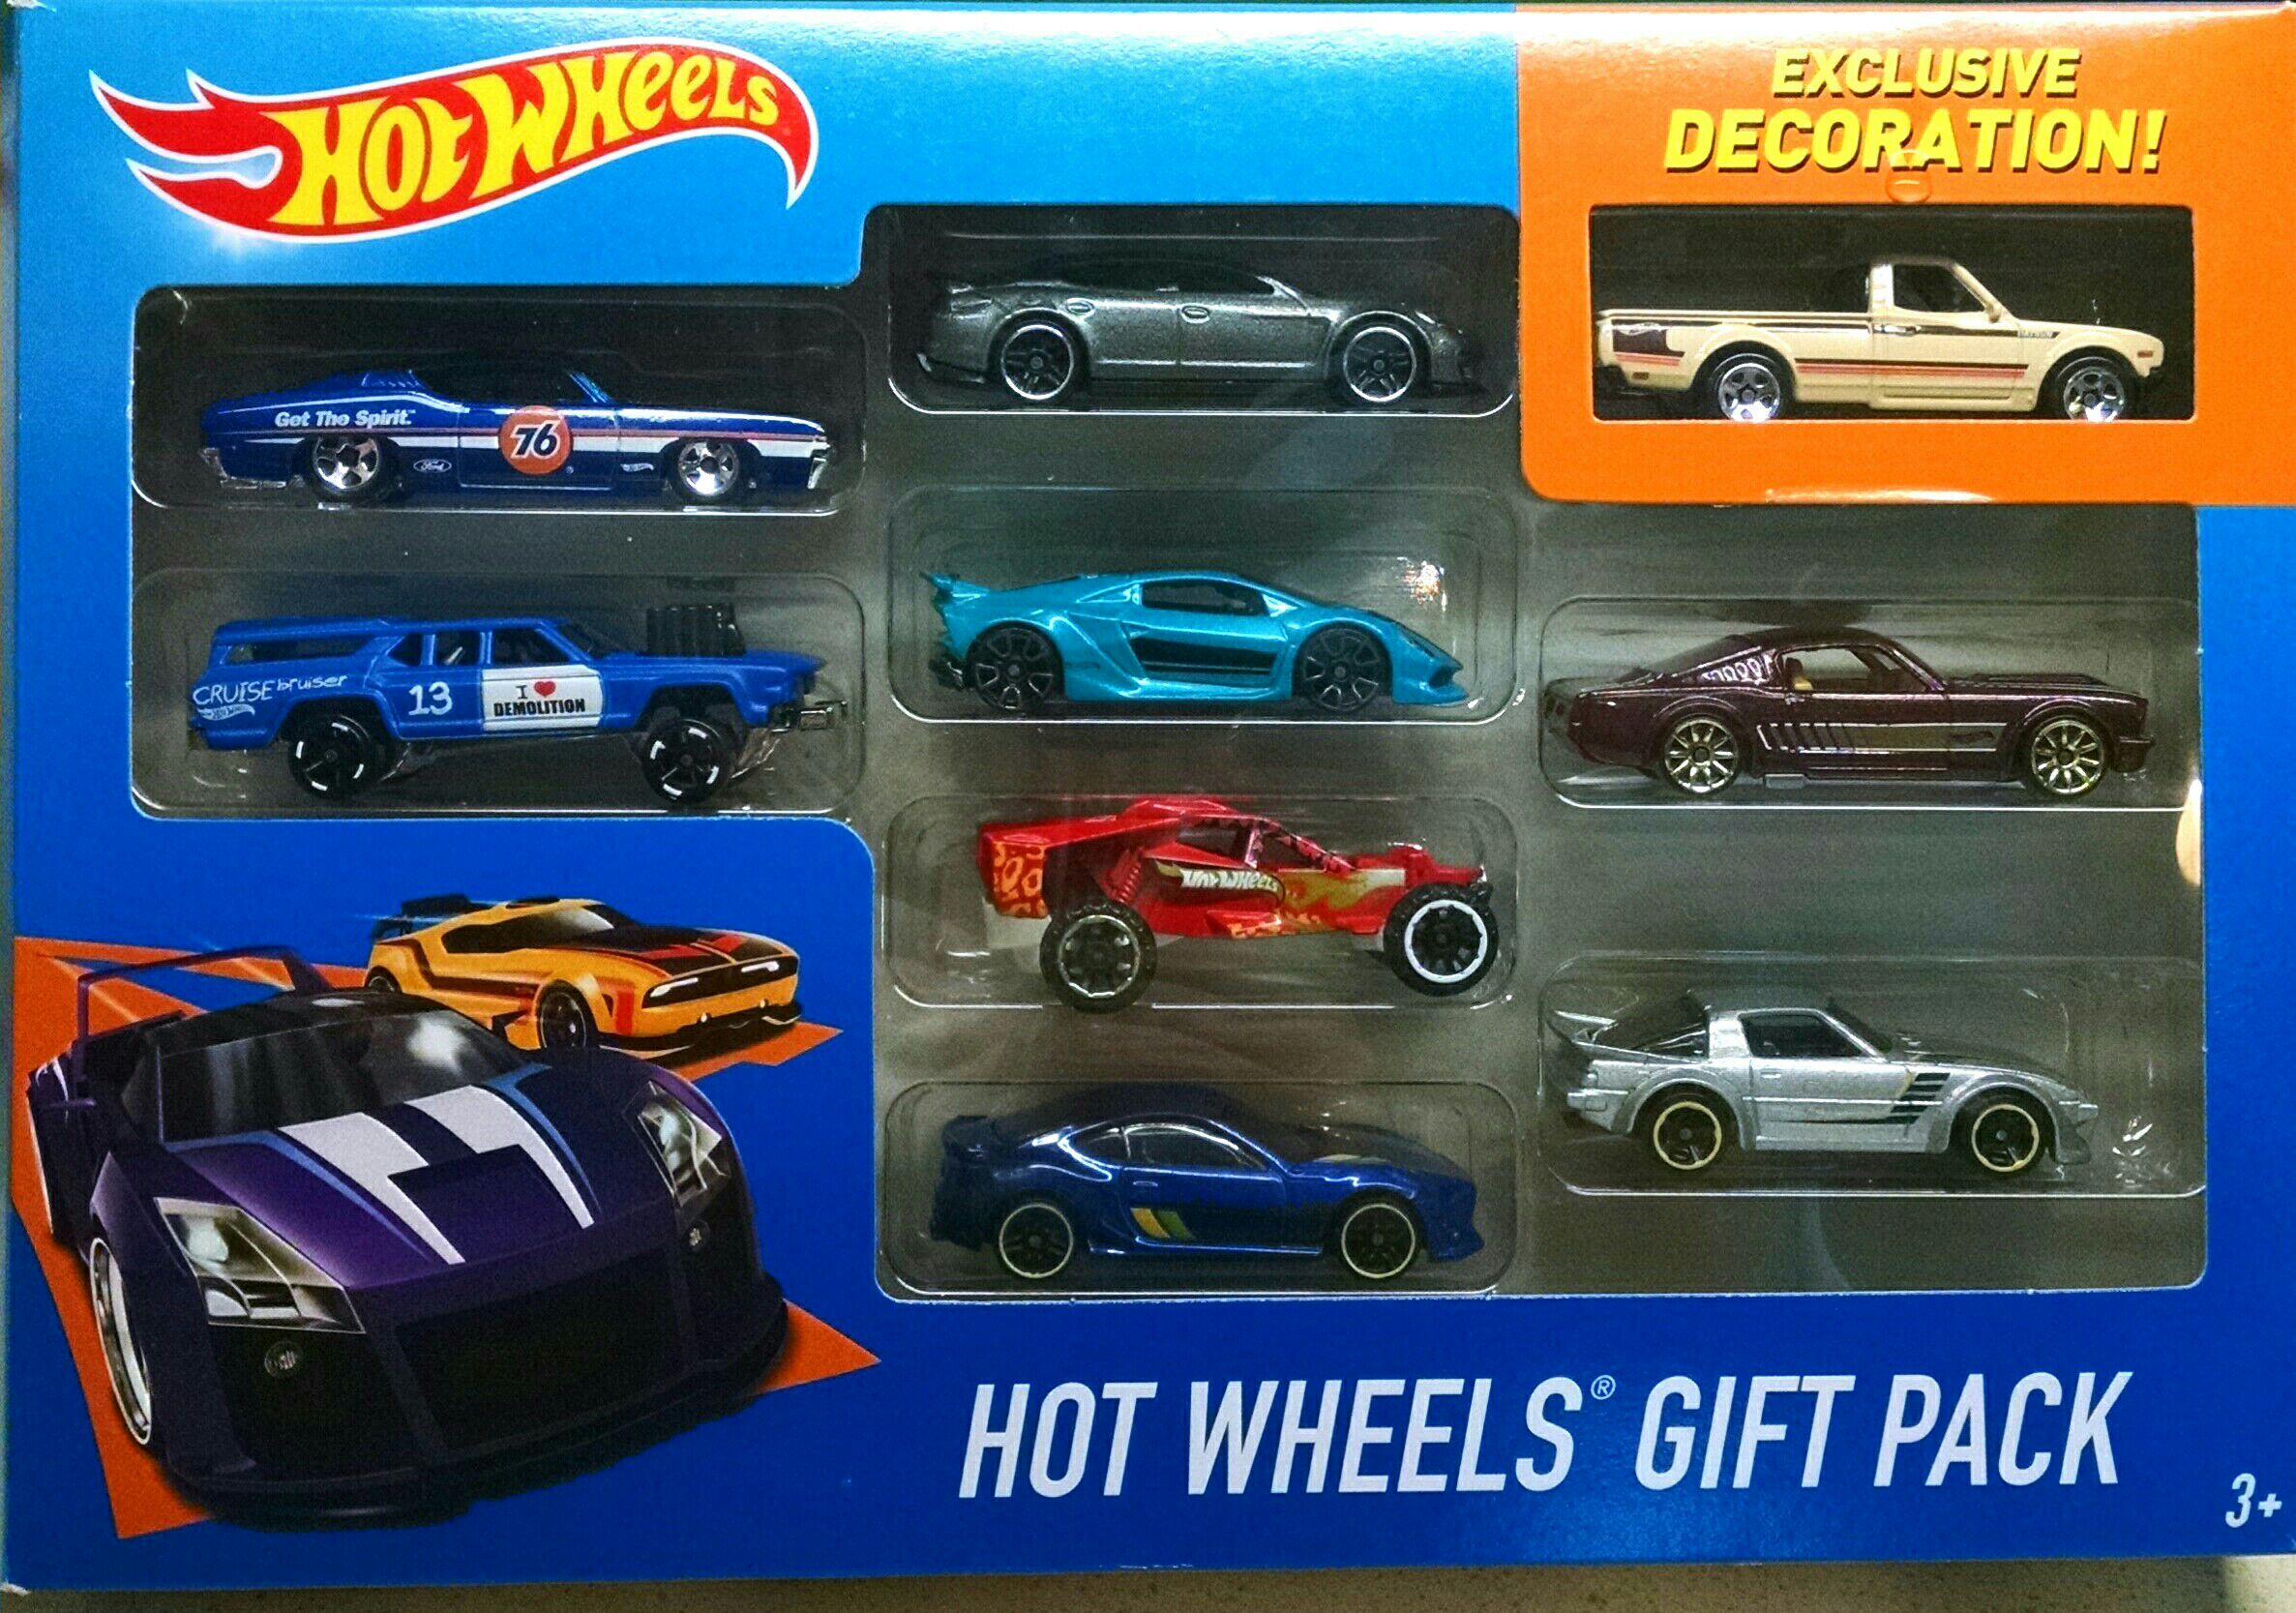 ’65 Mustang Fsstback - Hot Wheels 9 Pack - Exclusive toy car collectible - Main Image 1